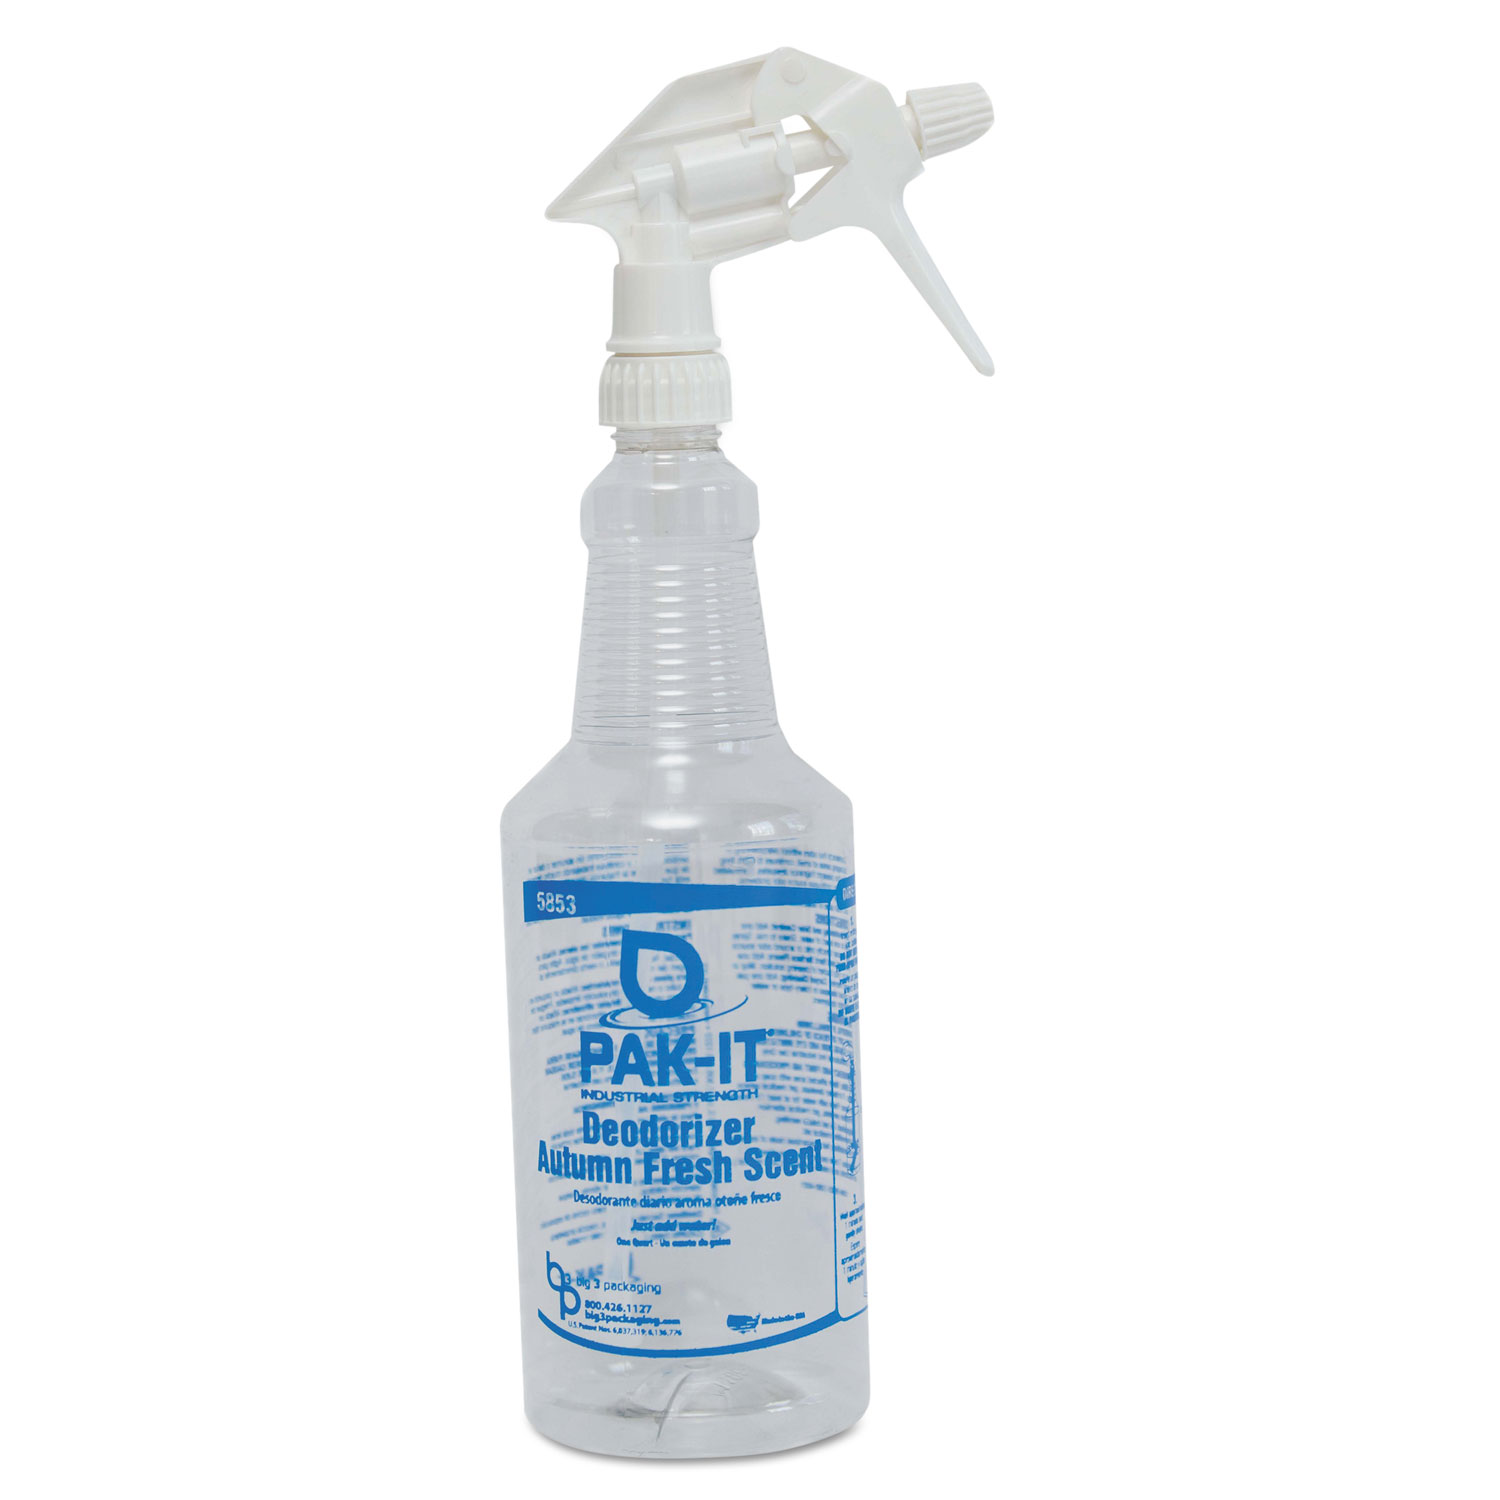 Empty Color-Coded Trigger-Spray Bottle,32 oz, for Deodorizer-Autumn Fresh, 12/CT